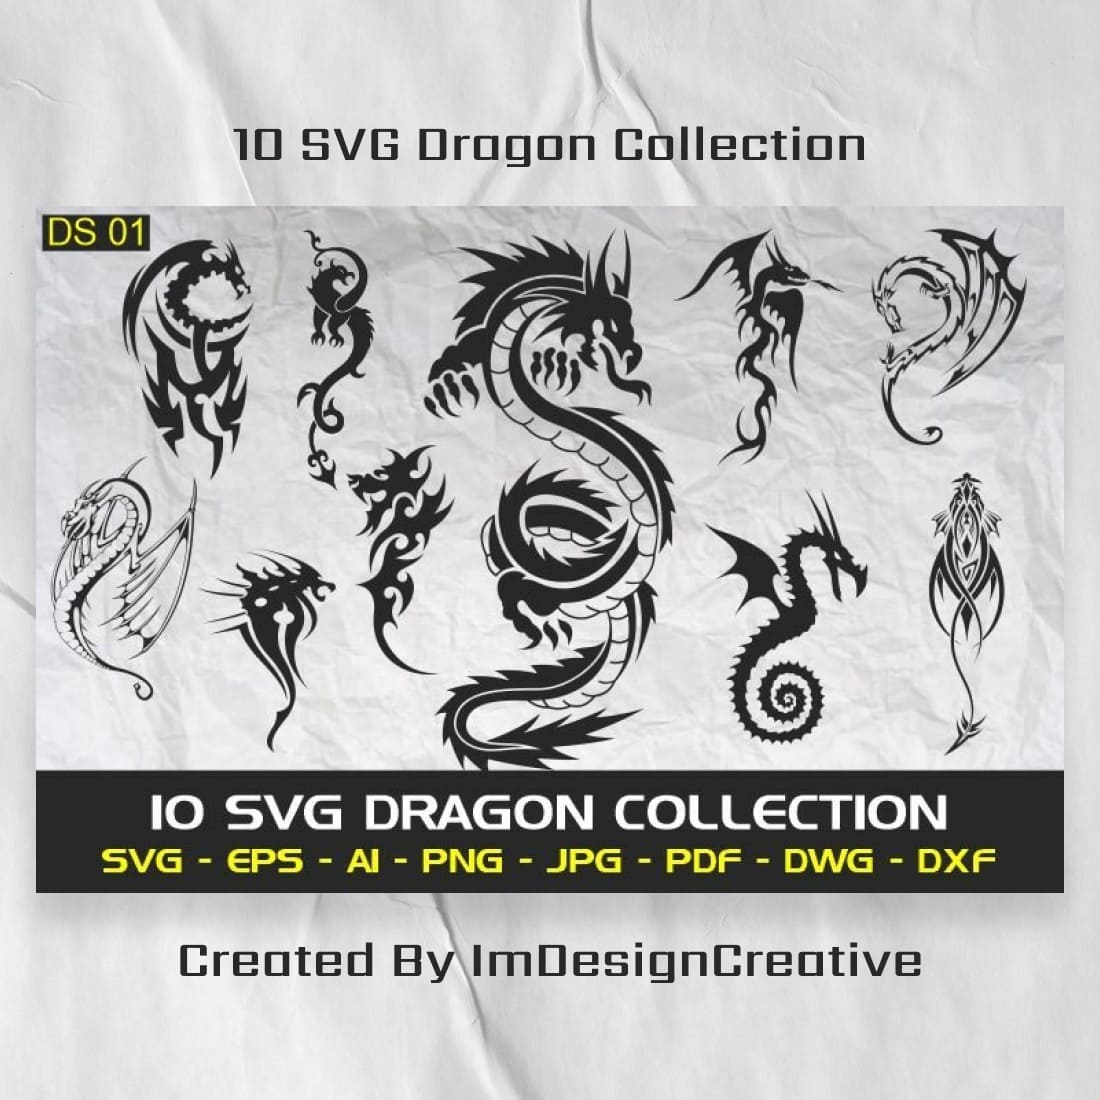 10 svg dragon collection cover 1